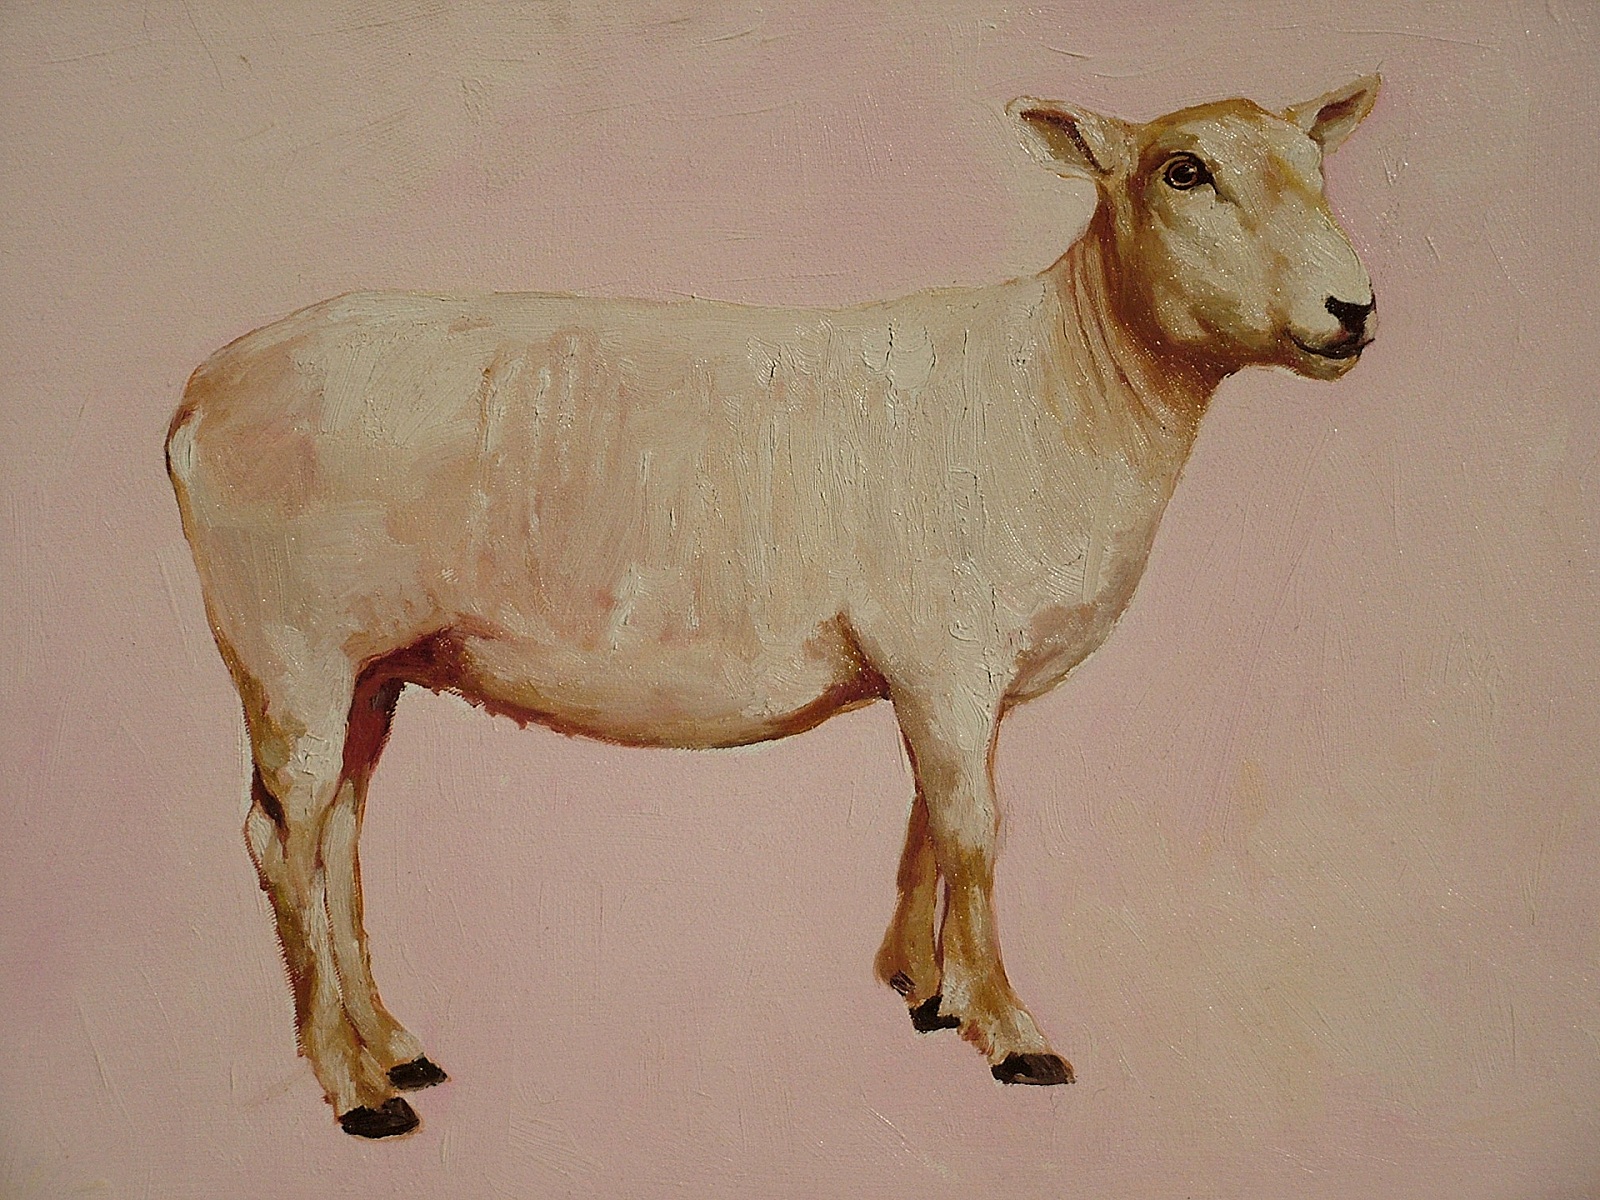 Lamb - 2003, oil on canvas, 45 x 110 cm,   private collection, RO - 16